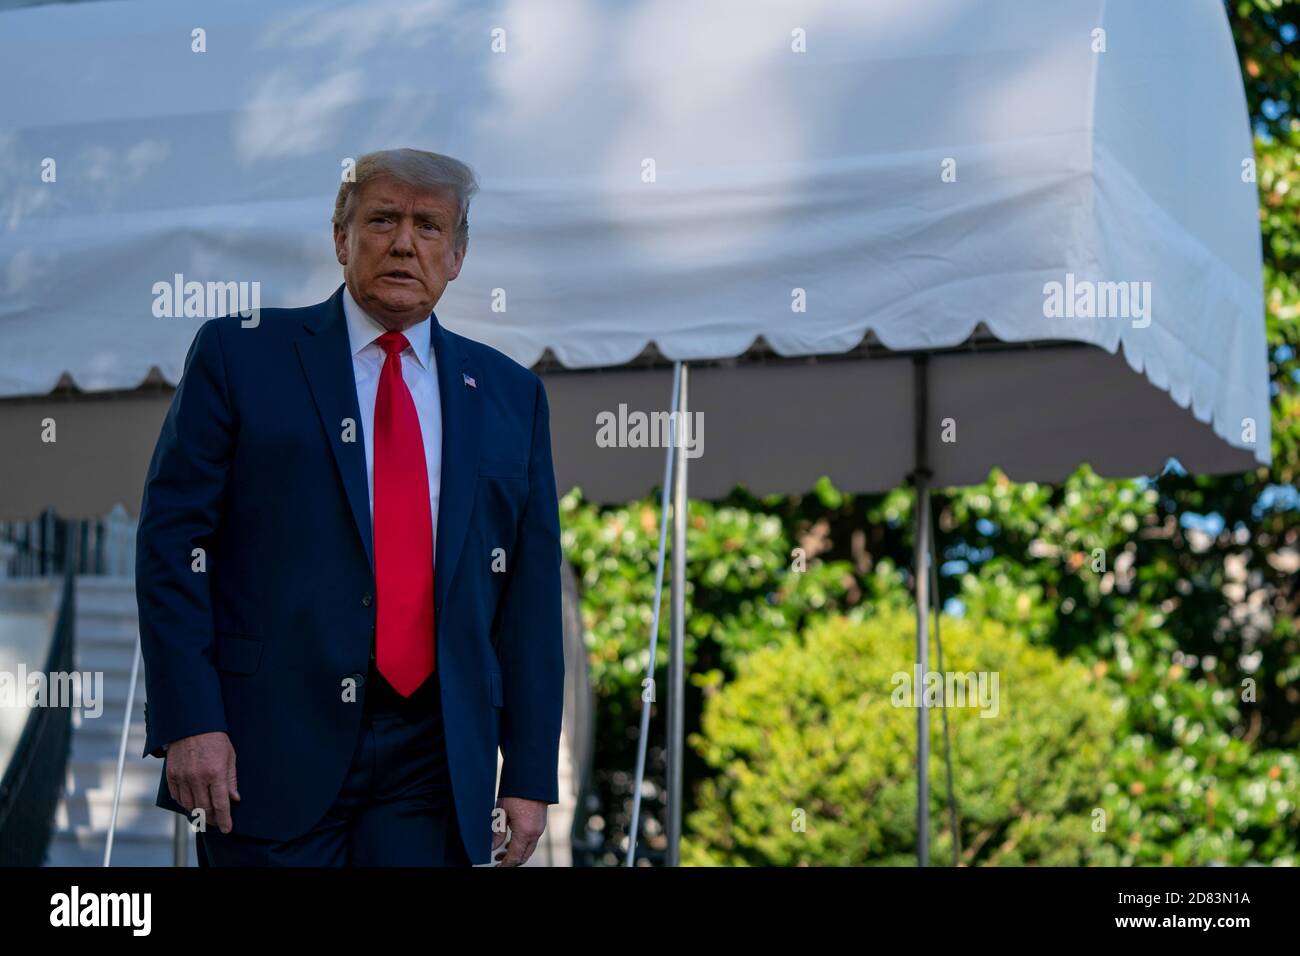 US President Donald Trump prior to departing the White House abroad Marine One on Saturday, September 19, 2020 in Washington, D.C.-Trump is traveling to North Carolina for a campaign event before returning to Washington, D.C. tonight. Credit: Alex Edelman/The Photo Access Stock Photo